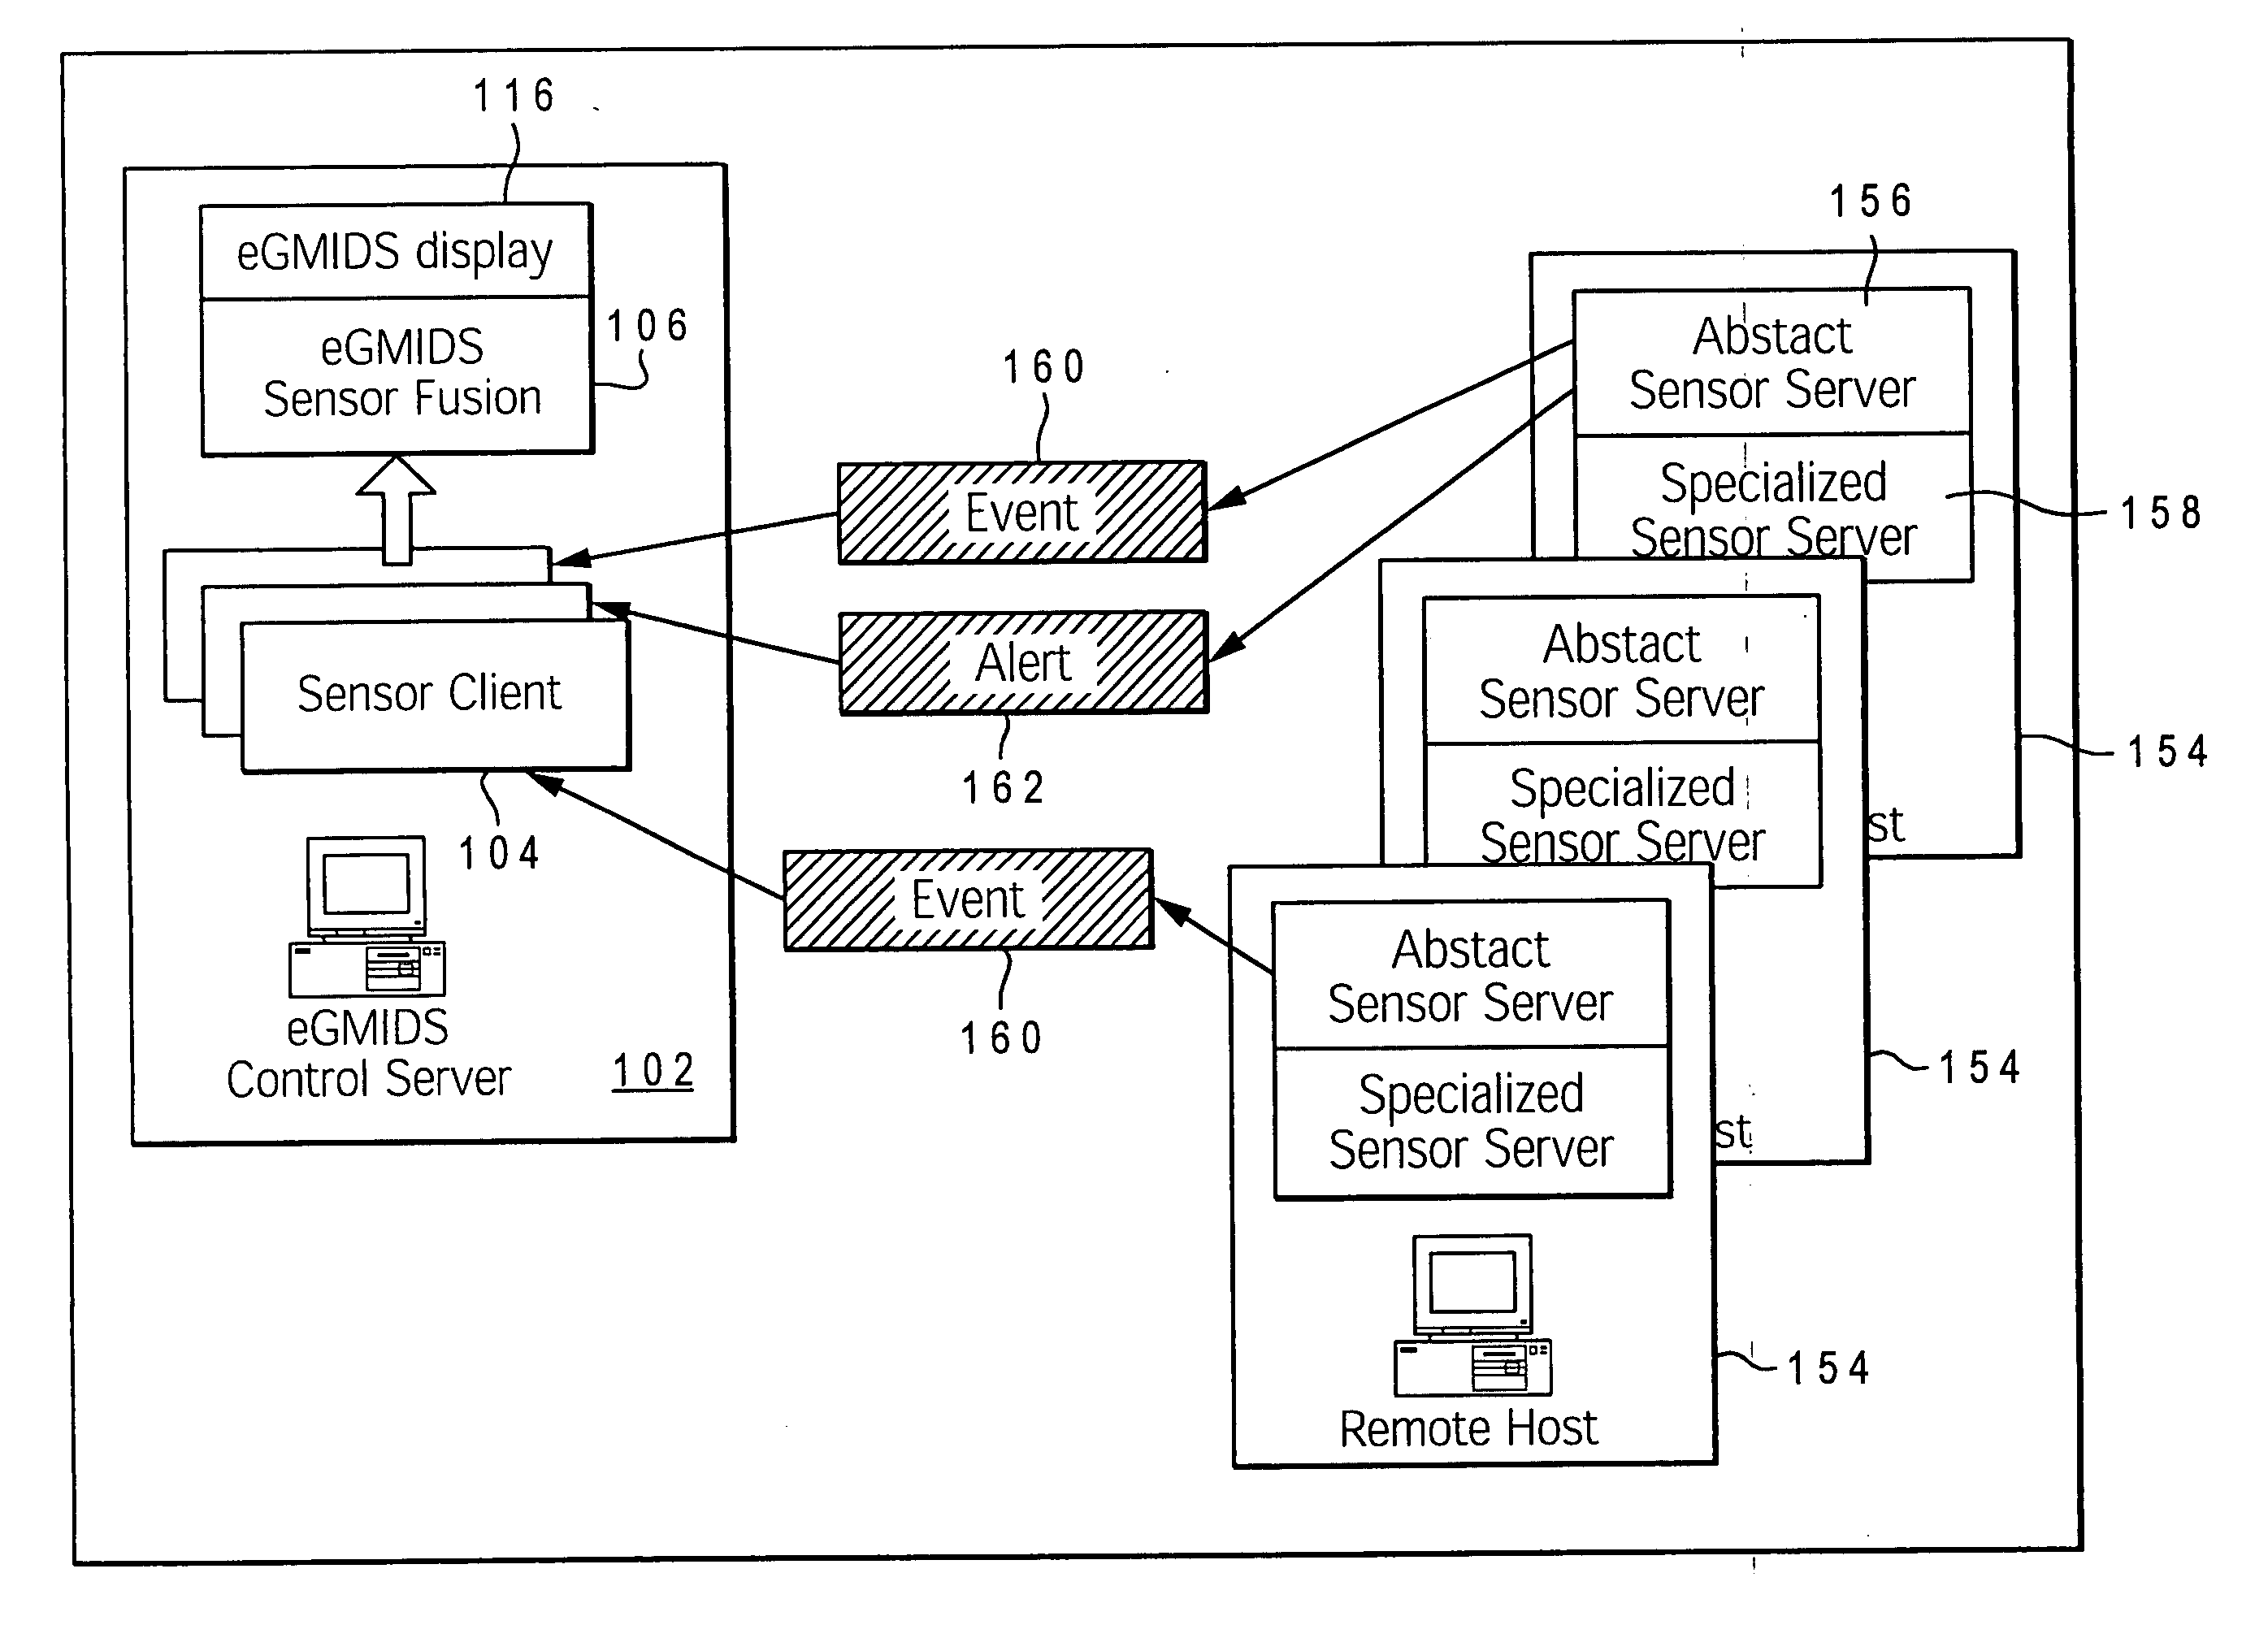 Enabling network intrusion detection by representing network activity in graphical form utilizing distributed data sensors to detect and transmit activity data